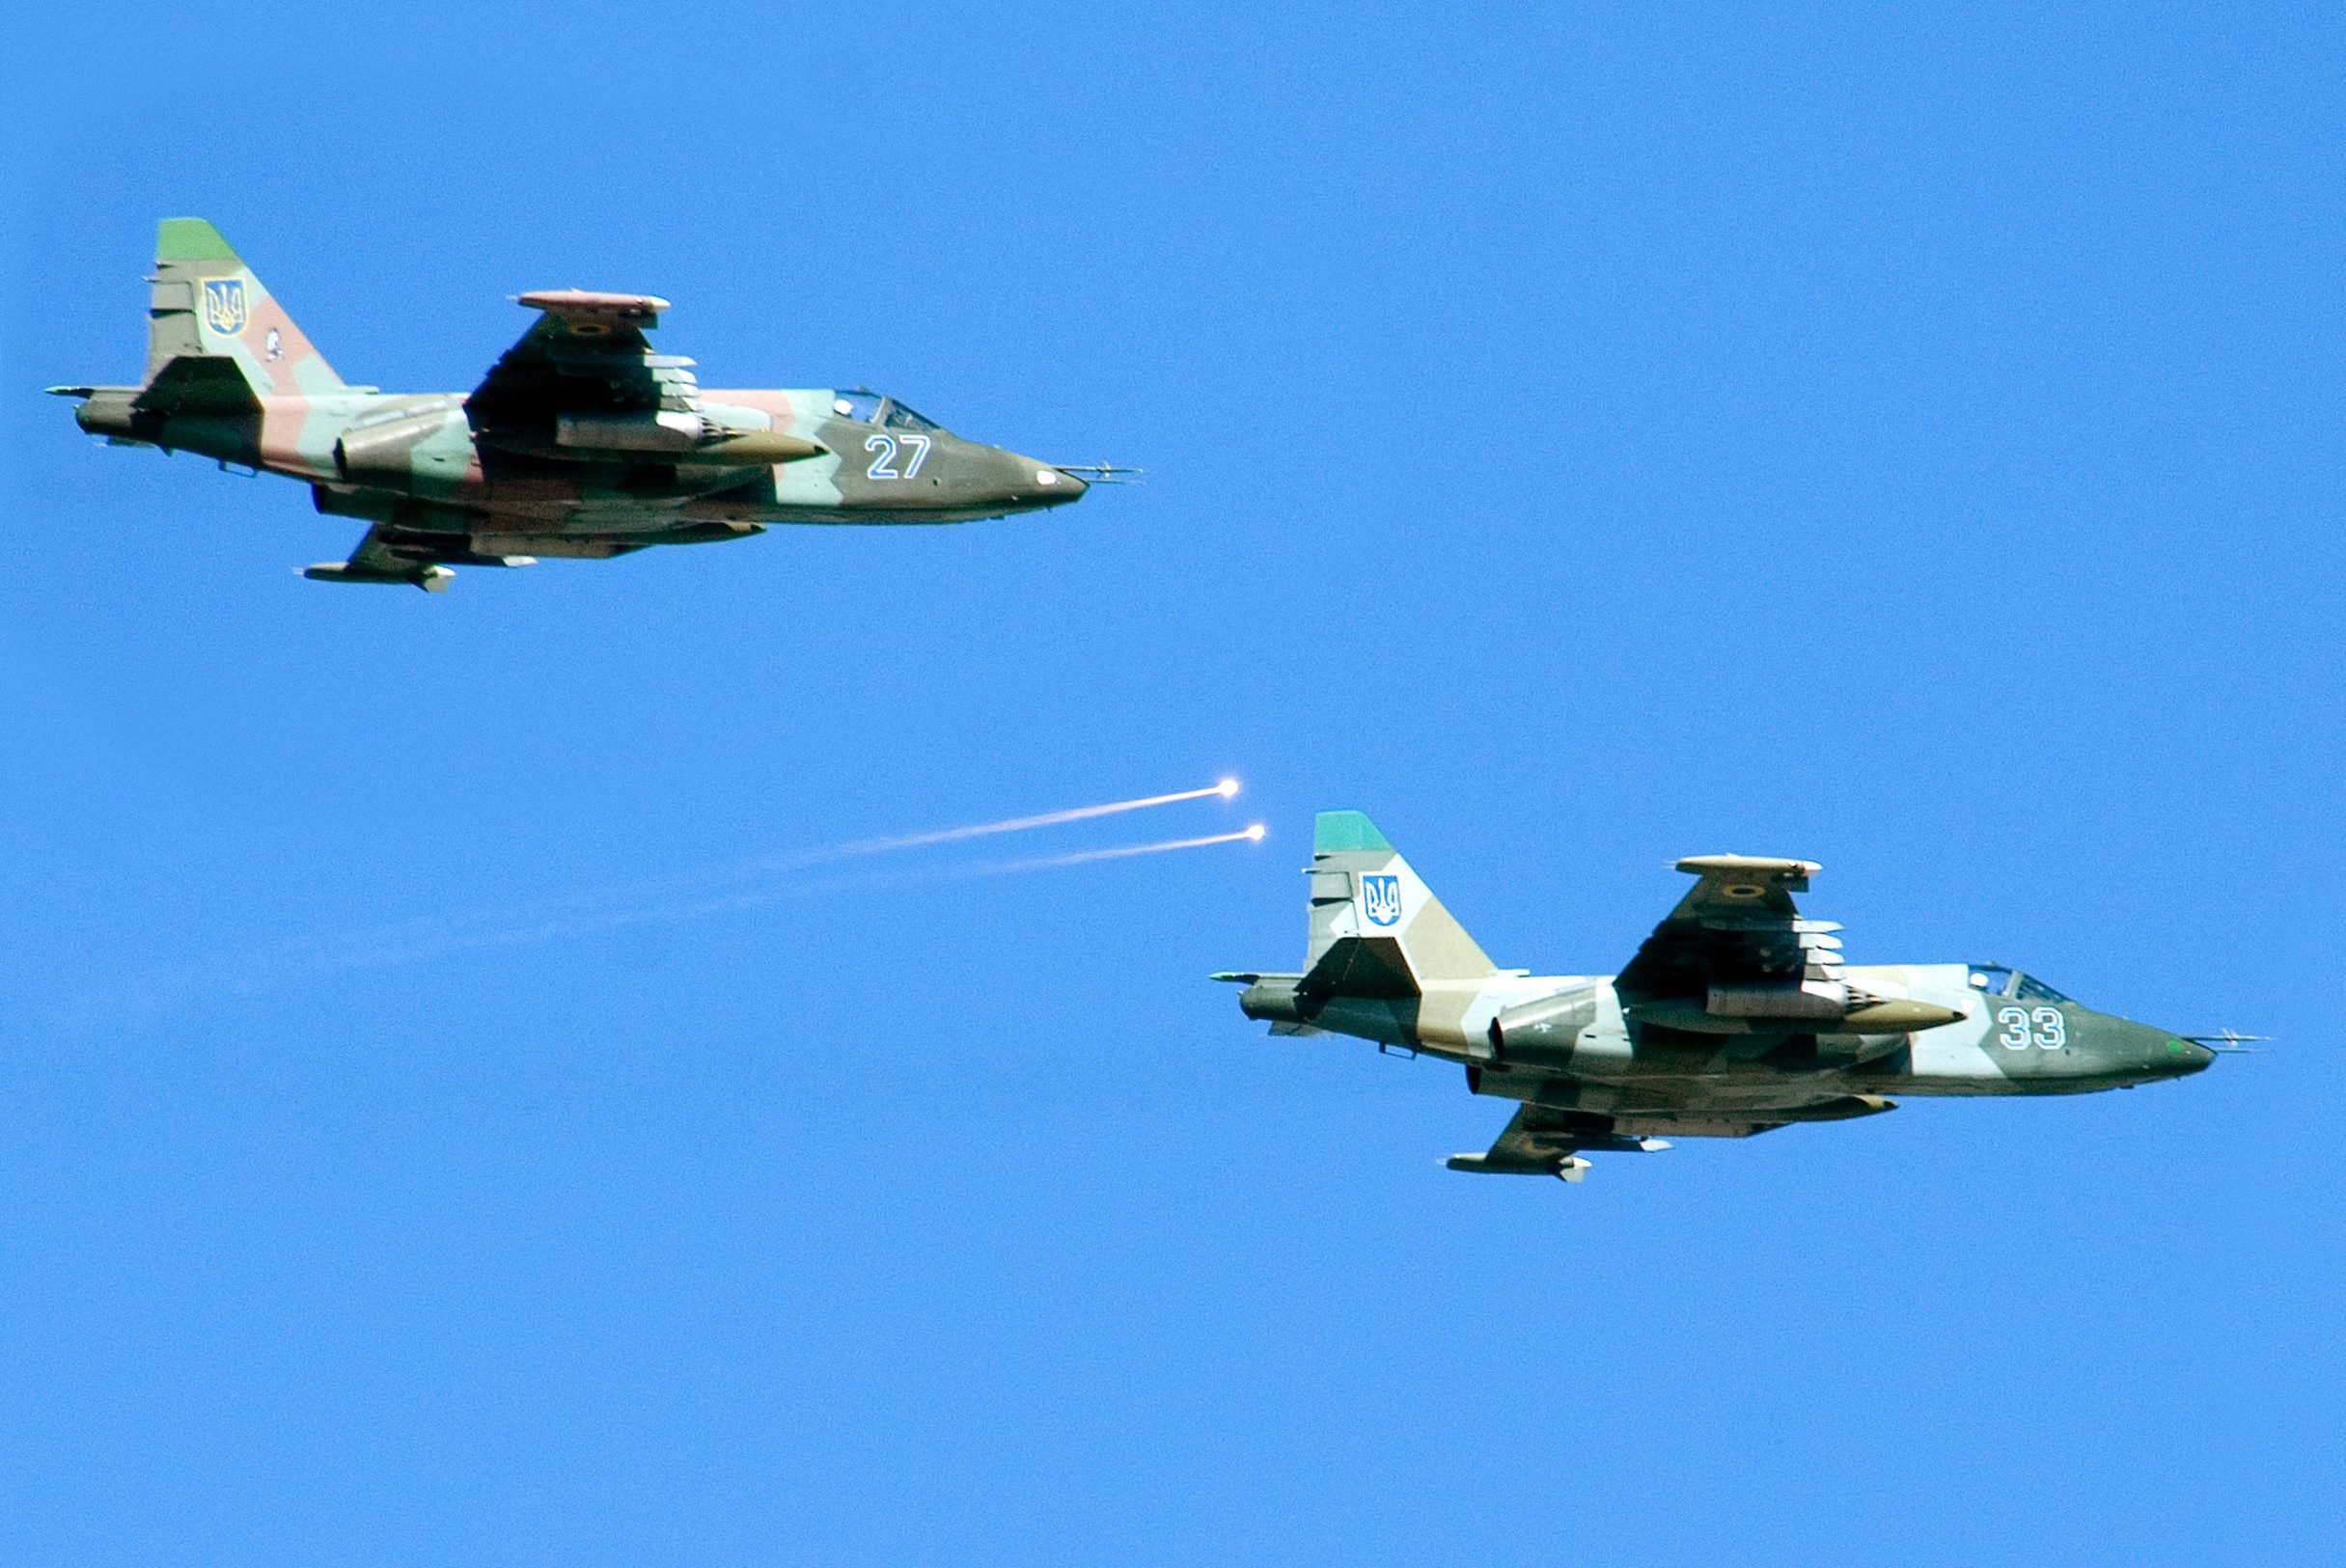 A file picture dated September 17, 2007 shows Ukrainian Su-25 attack planes during manoeuvres at the landfill in Rovno, Ukraine. Pro-Russian separatists have shot down two Ukrainian military jets in the east of the country, Defence Ministry spokesman Oleksiy Dmytrashkivskiy said on July 23, 2014. (Sergey Popsuevich—EPA)